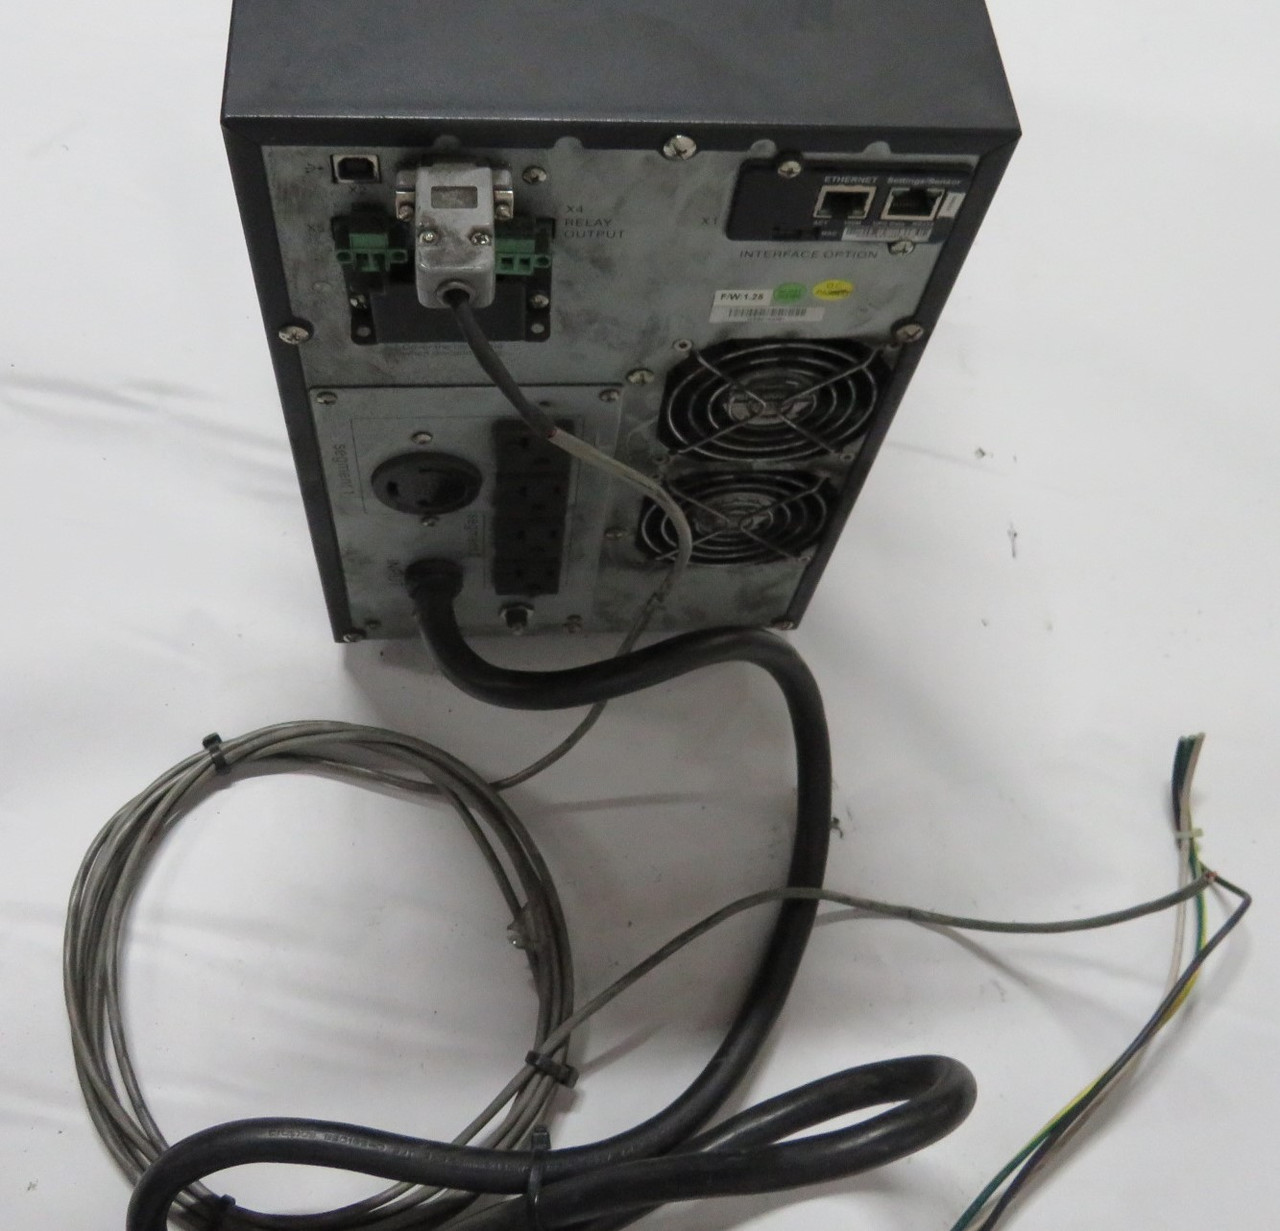 Eaton PW9130L3000T-XL Uninterruptible Power Supply 96VDC BROKEN Cover USED